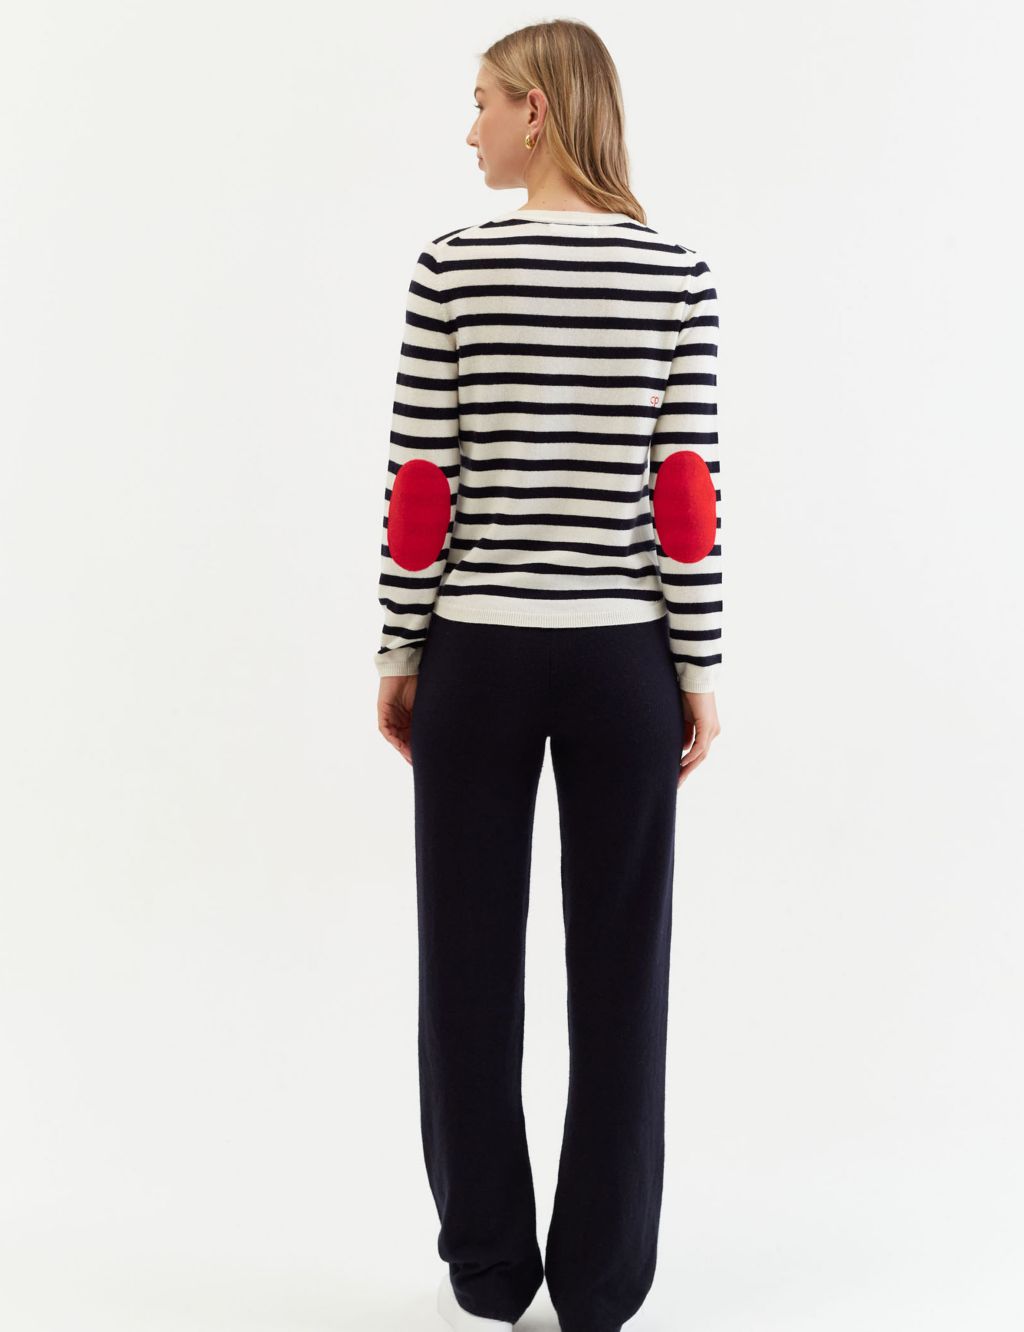 Wool Rich Striped Sweatshirt with Cashmere image 3